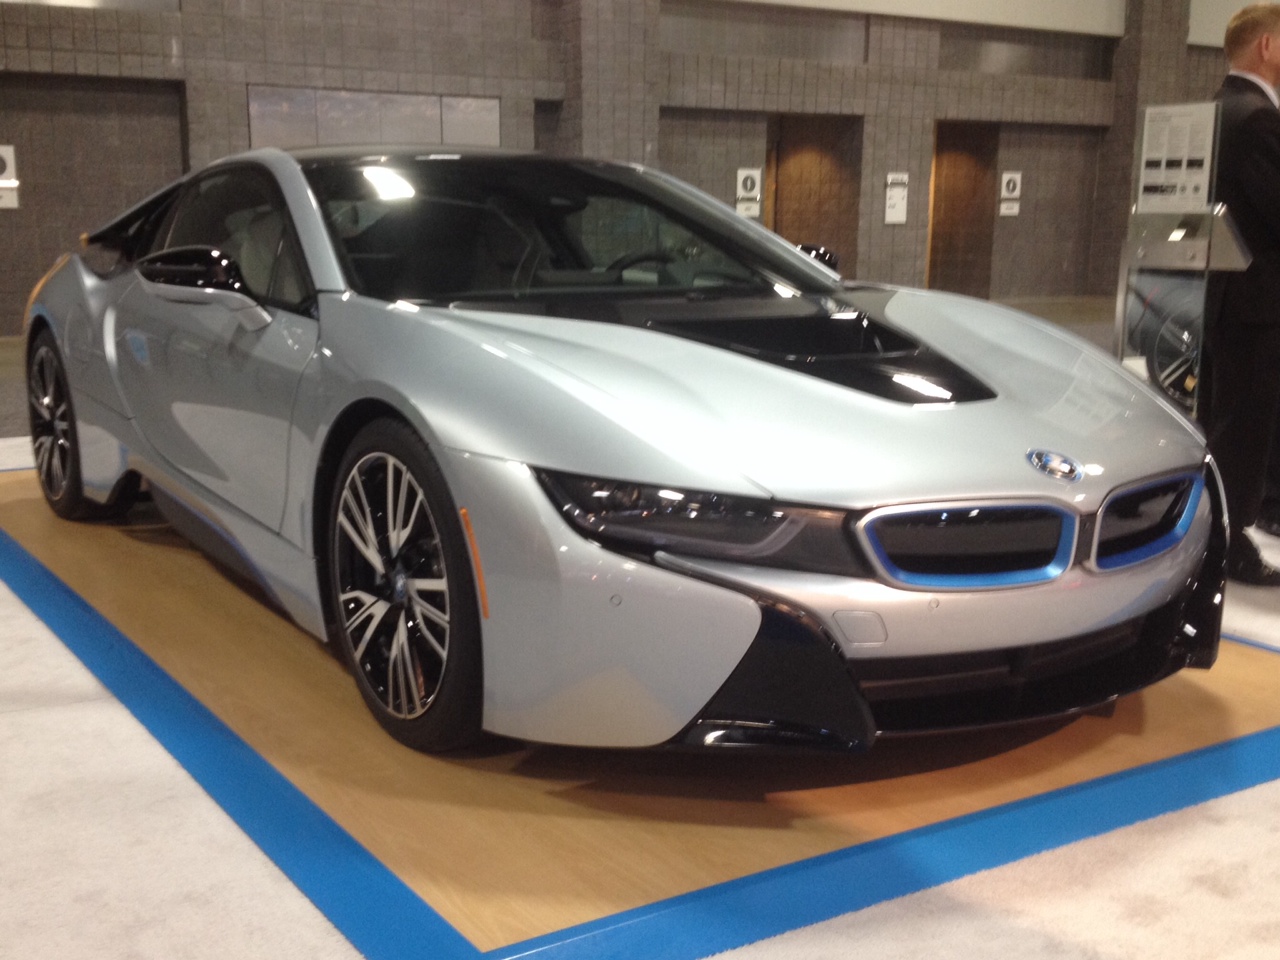 The BMW I8 is an all wheel drive hybrid sports car that comes in 140 grand. (WTOP/John Aaron)